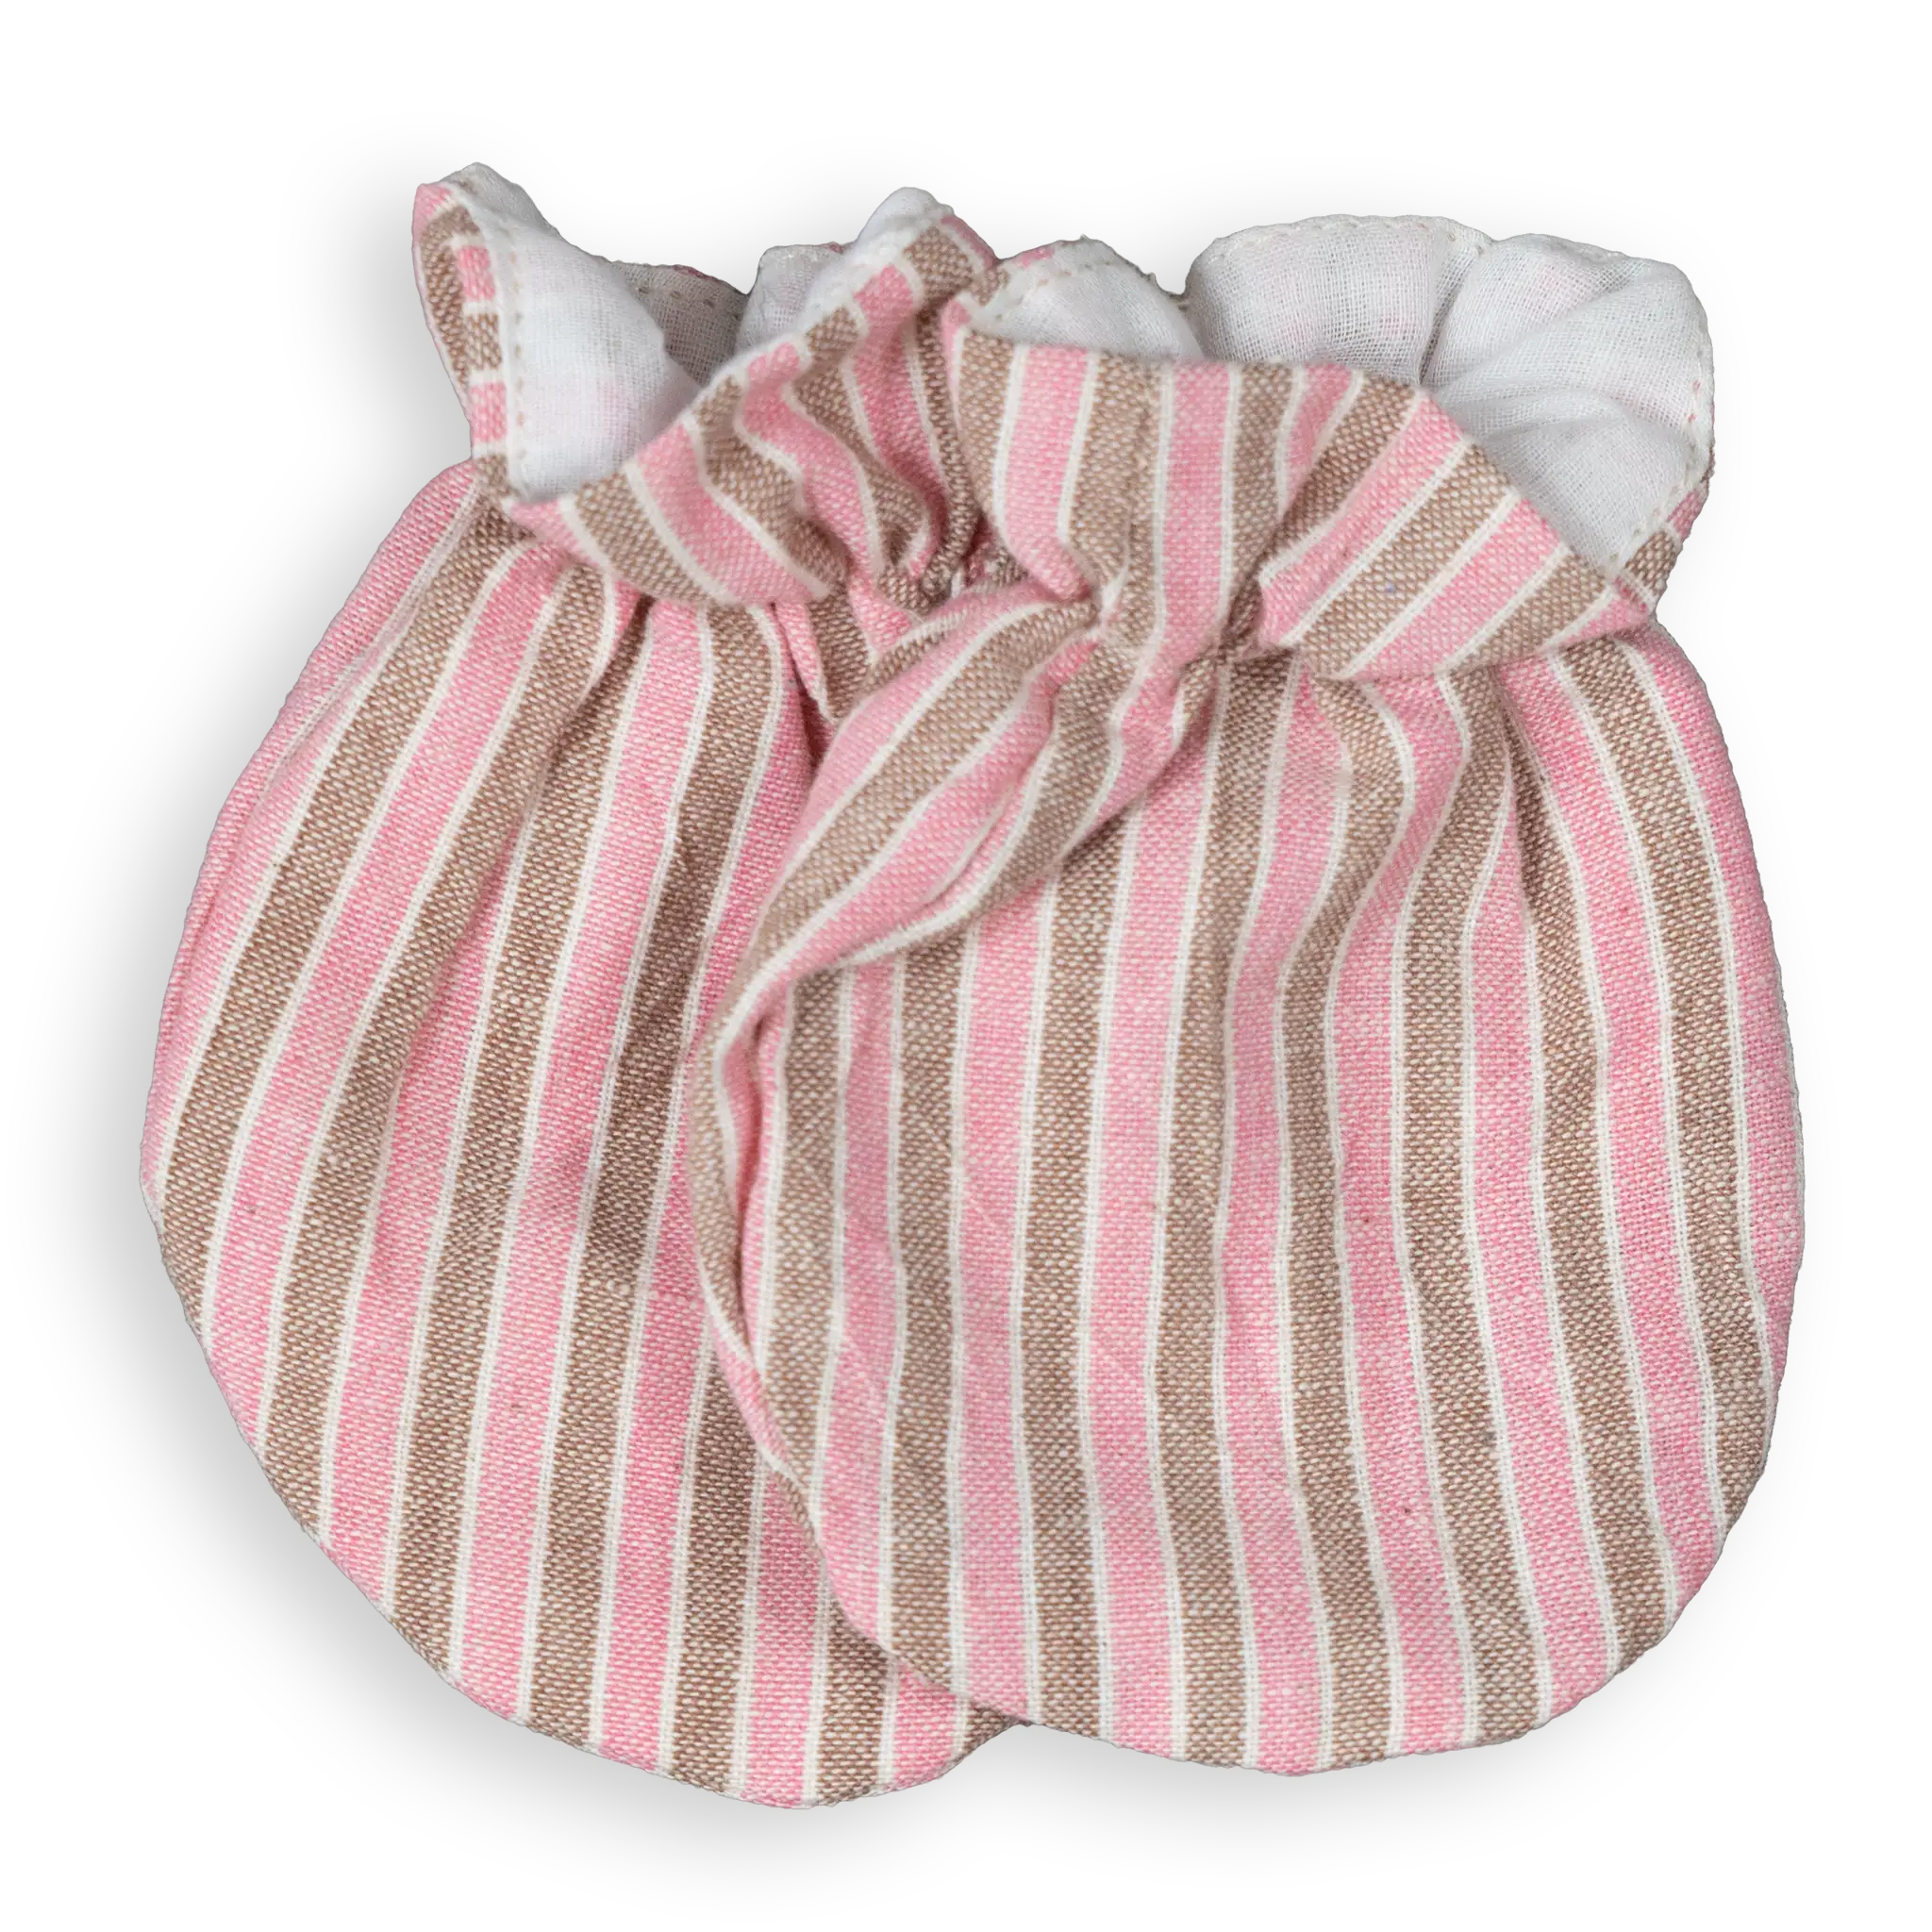 Kokroma Anti-Scratch Mittens are available with colourful patterns made with 100% soft cotton. Recommended for infants 0-6 months old.